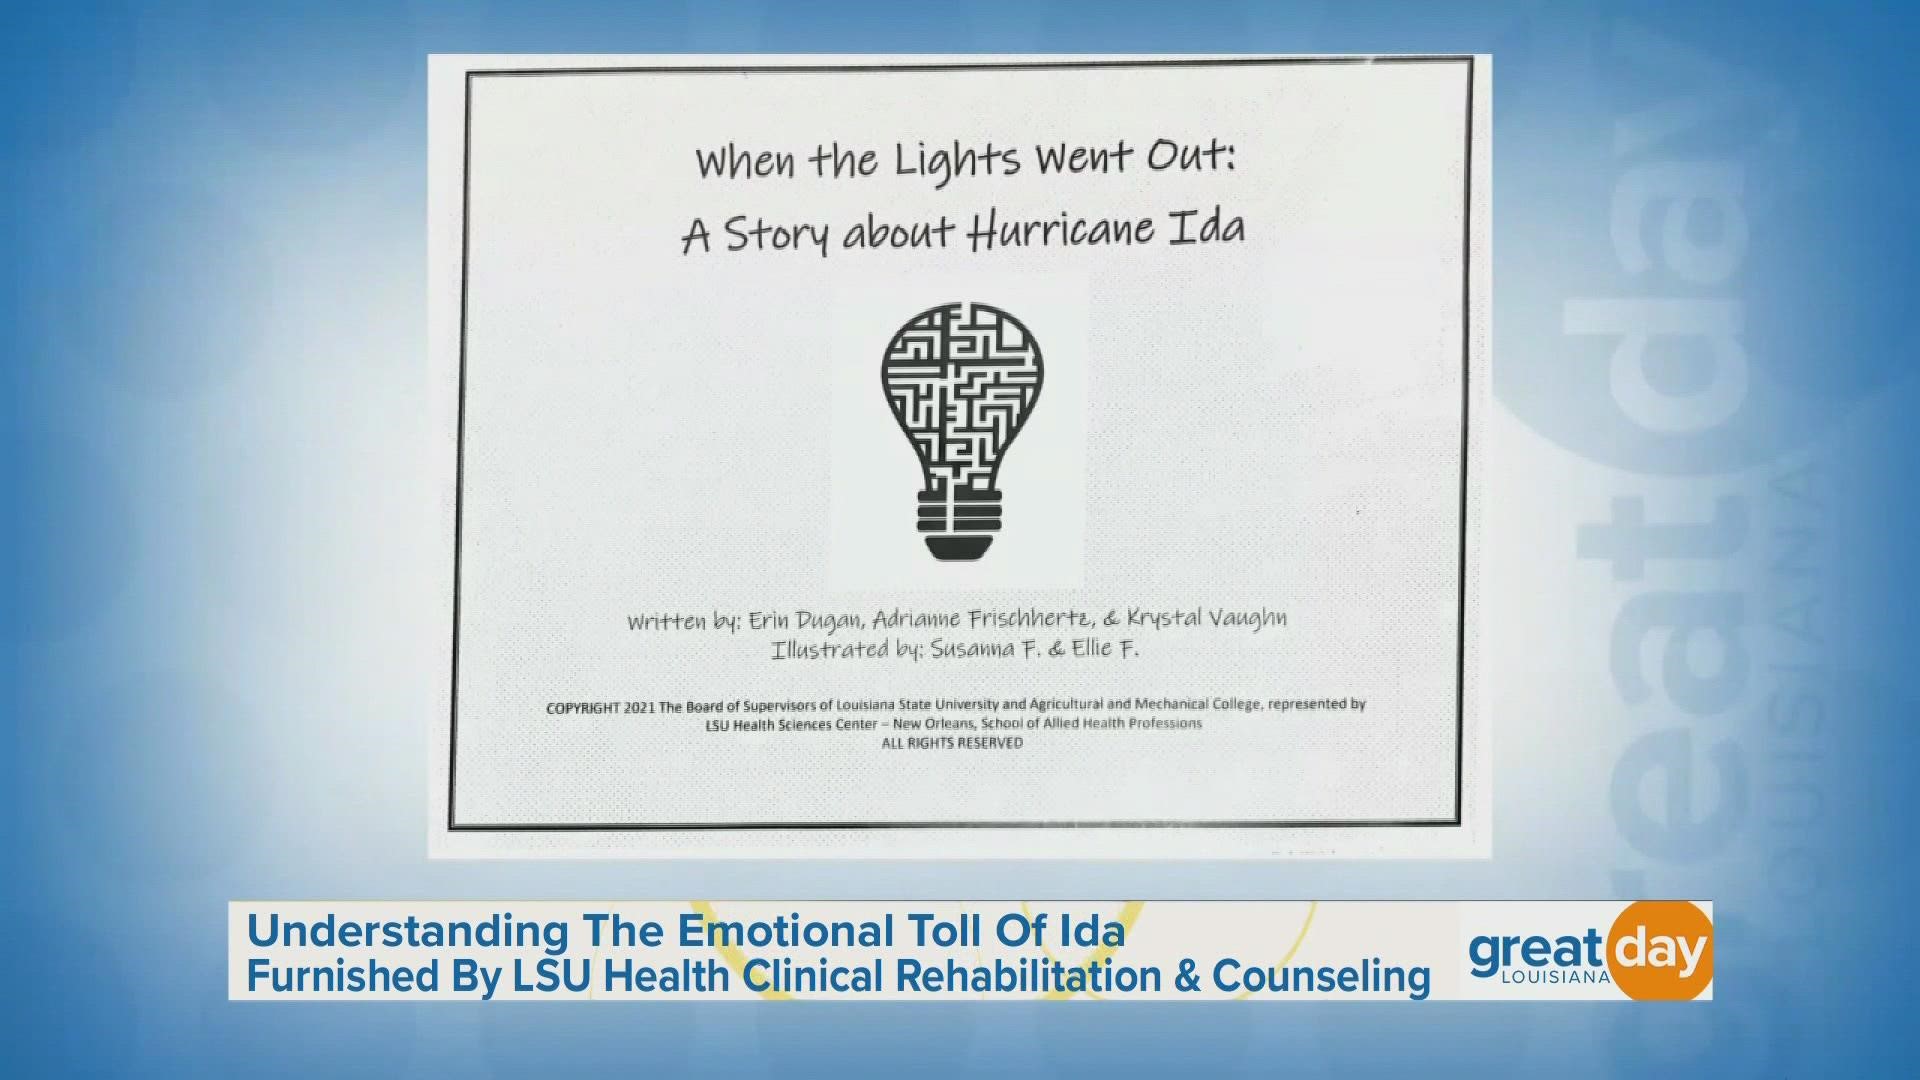 A play therapist shared details about a new book which is designed to help kids who may have anxiety after Hurricane Ida.